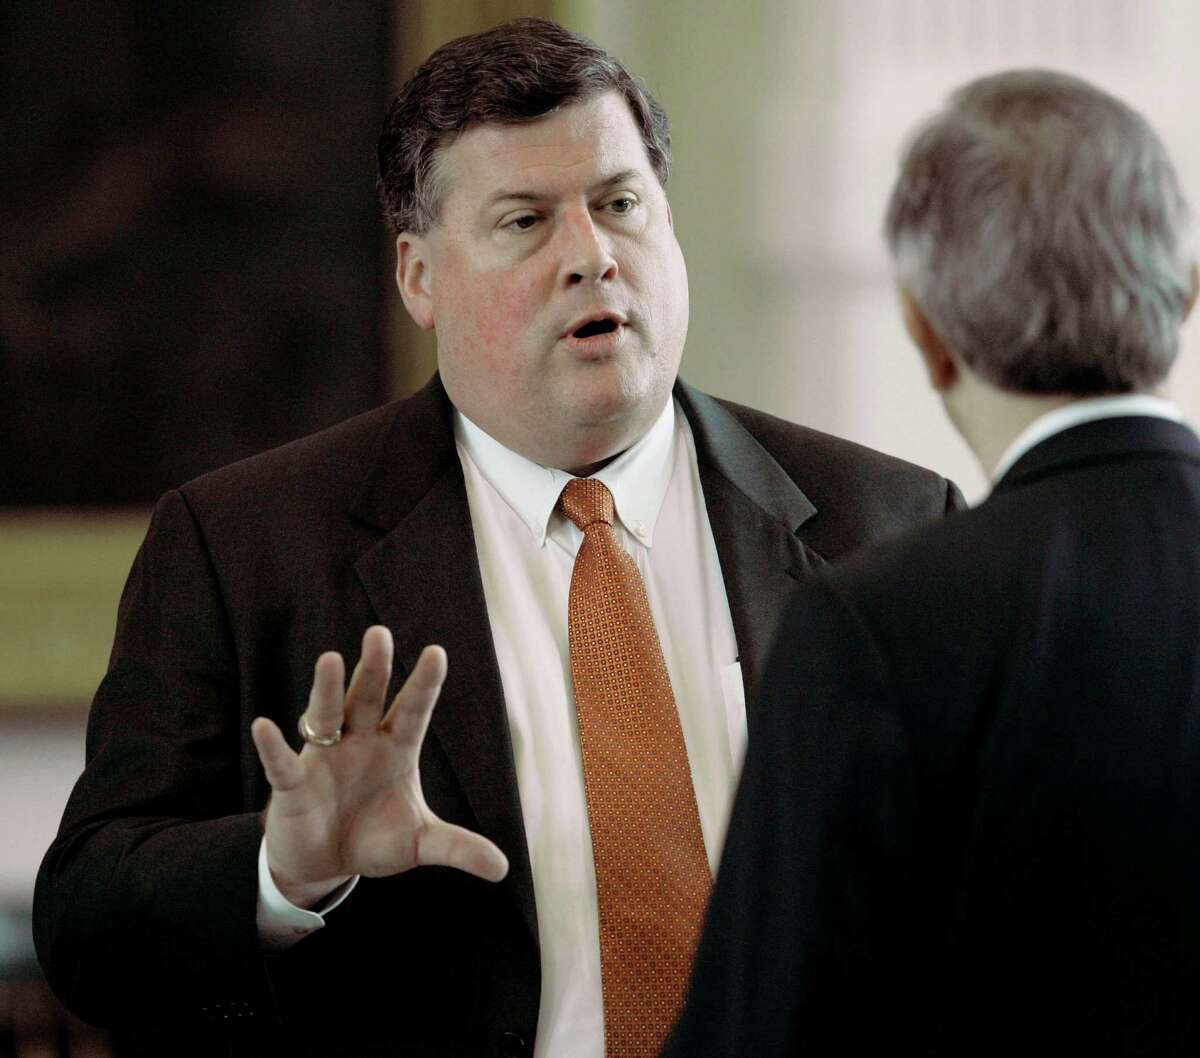 Sen. Tommy Williams, R-The Woodlands, left, talks with Sen. Jeff Wentworth, R-San Antonio, right, during the afternoon session in the Texas Senate Monday, May 14, 2007, in Austin, Texas. Hoping to avoid a veto override fight and a special legislative session, the Texas Senate began discussion on Williams' proposal that aims to address the governor's concerns with a sweeping transportation bill.